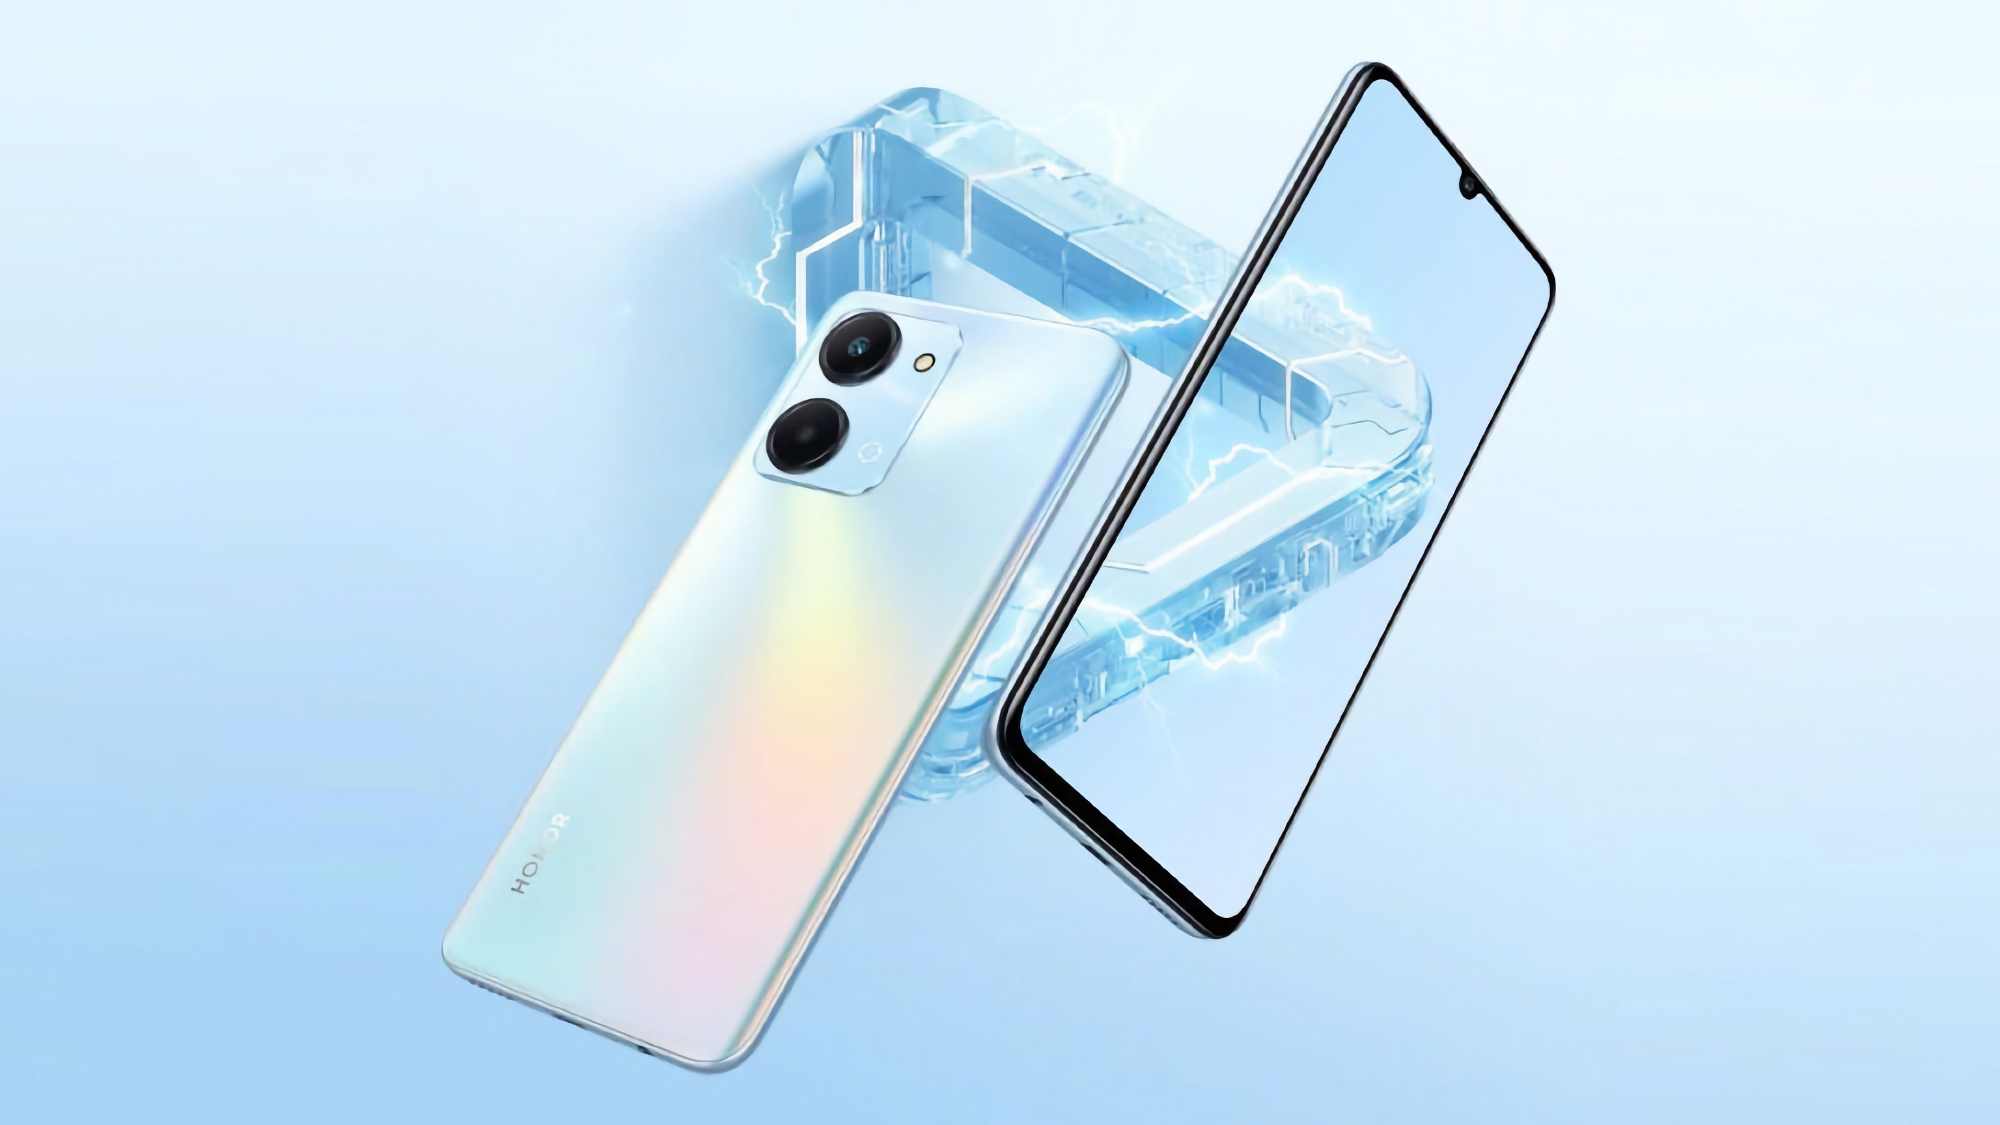 Here's what the Honor Play 7T will look like: the company's new budget smartphone with a 90Hz screen, Dimensity 6020 chip and 6000mAh battery